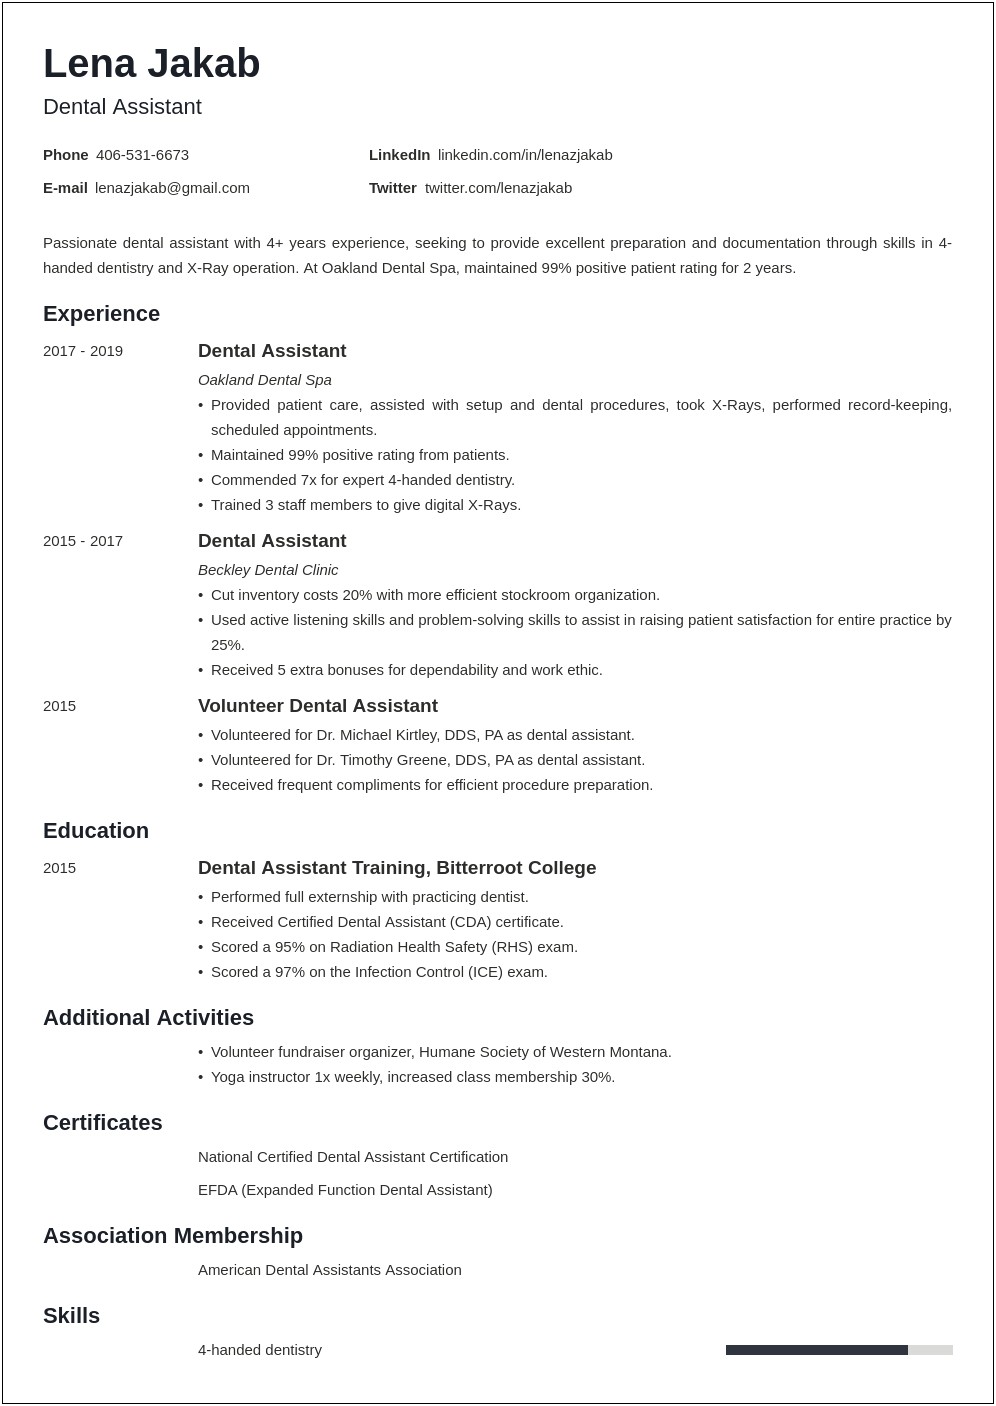 Sample Resume With Dental Assistant Externship Experience